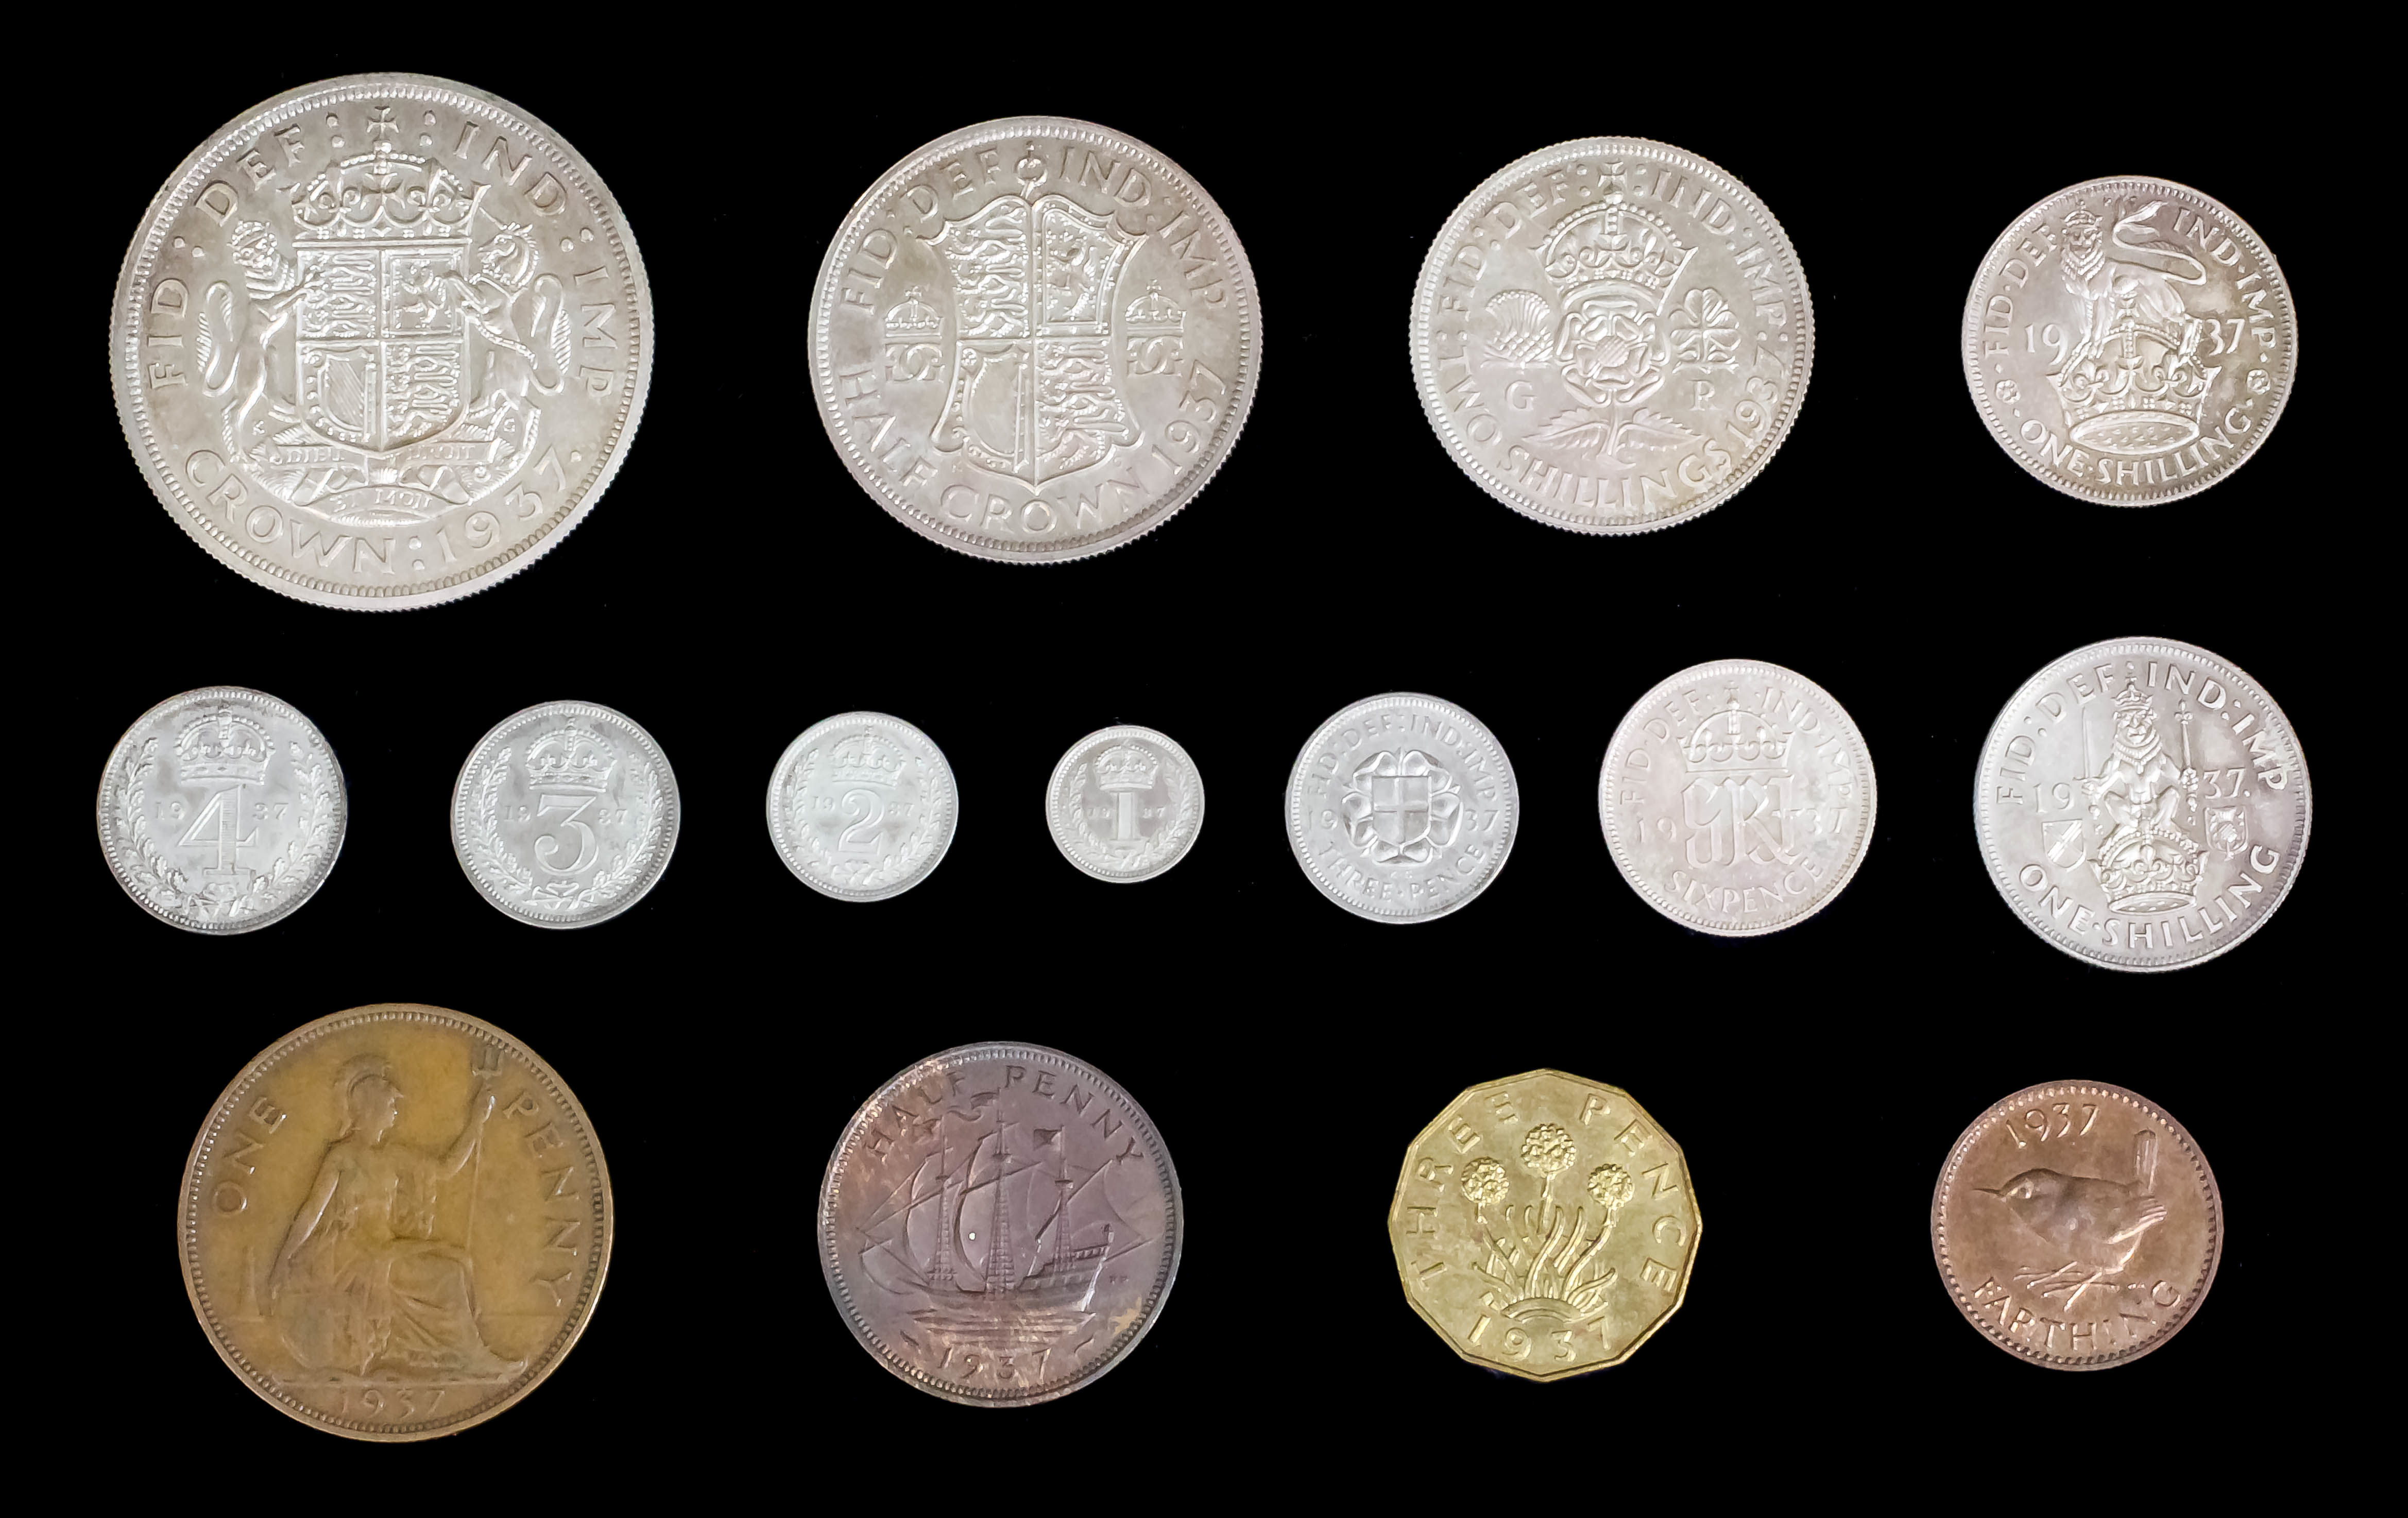 A George VI 1937 fifteen coin specimen set - Crown to Farthing (including Maundy Coins), all in